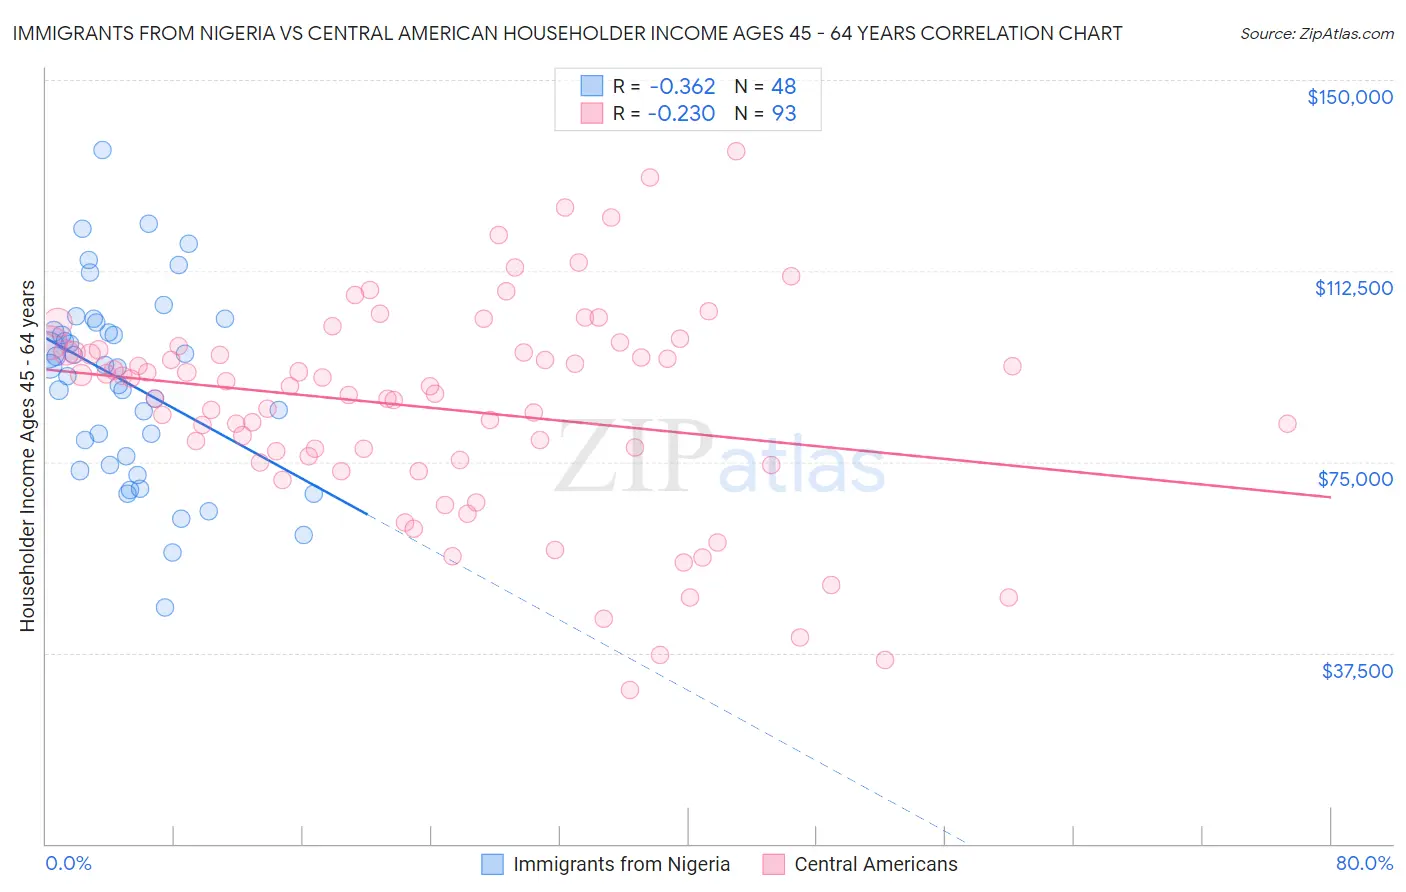 Immigrants from Nigeria vs Central American Householder Income Ages 45 - 64 years